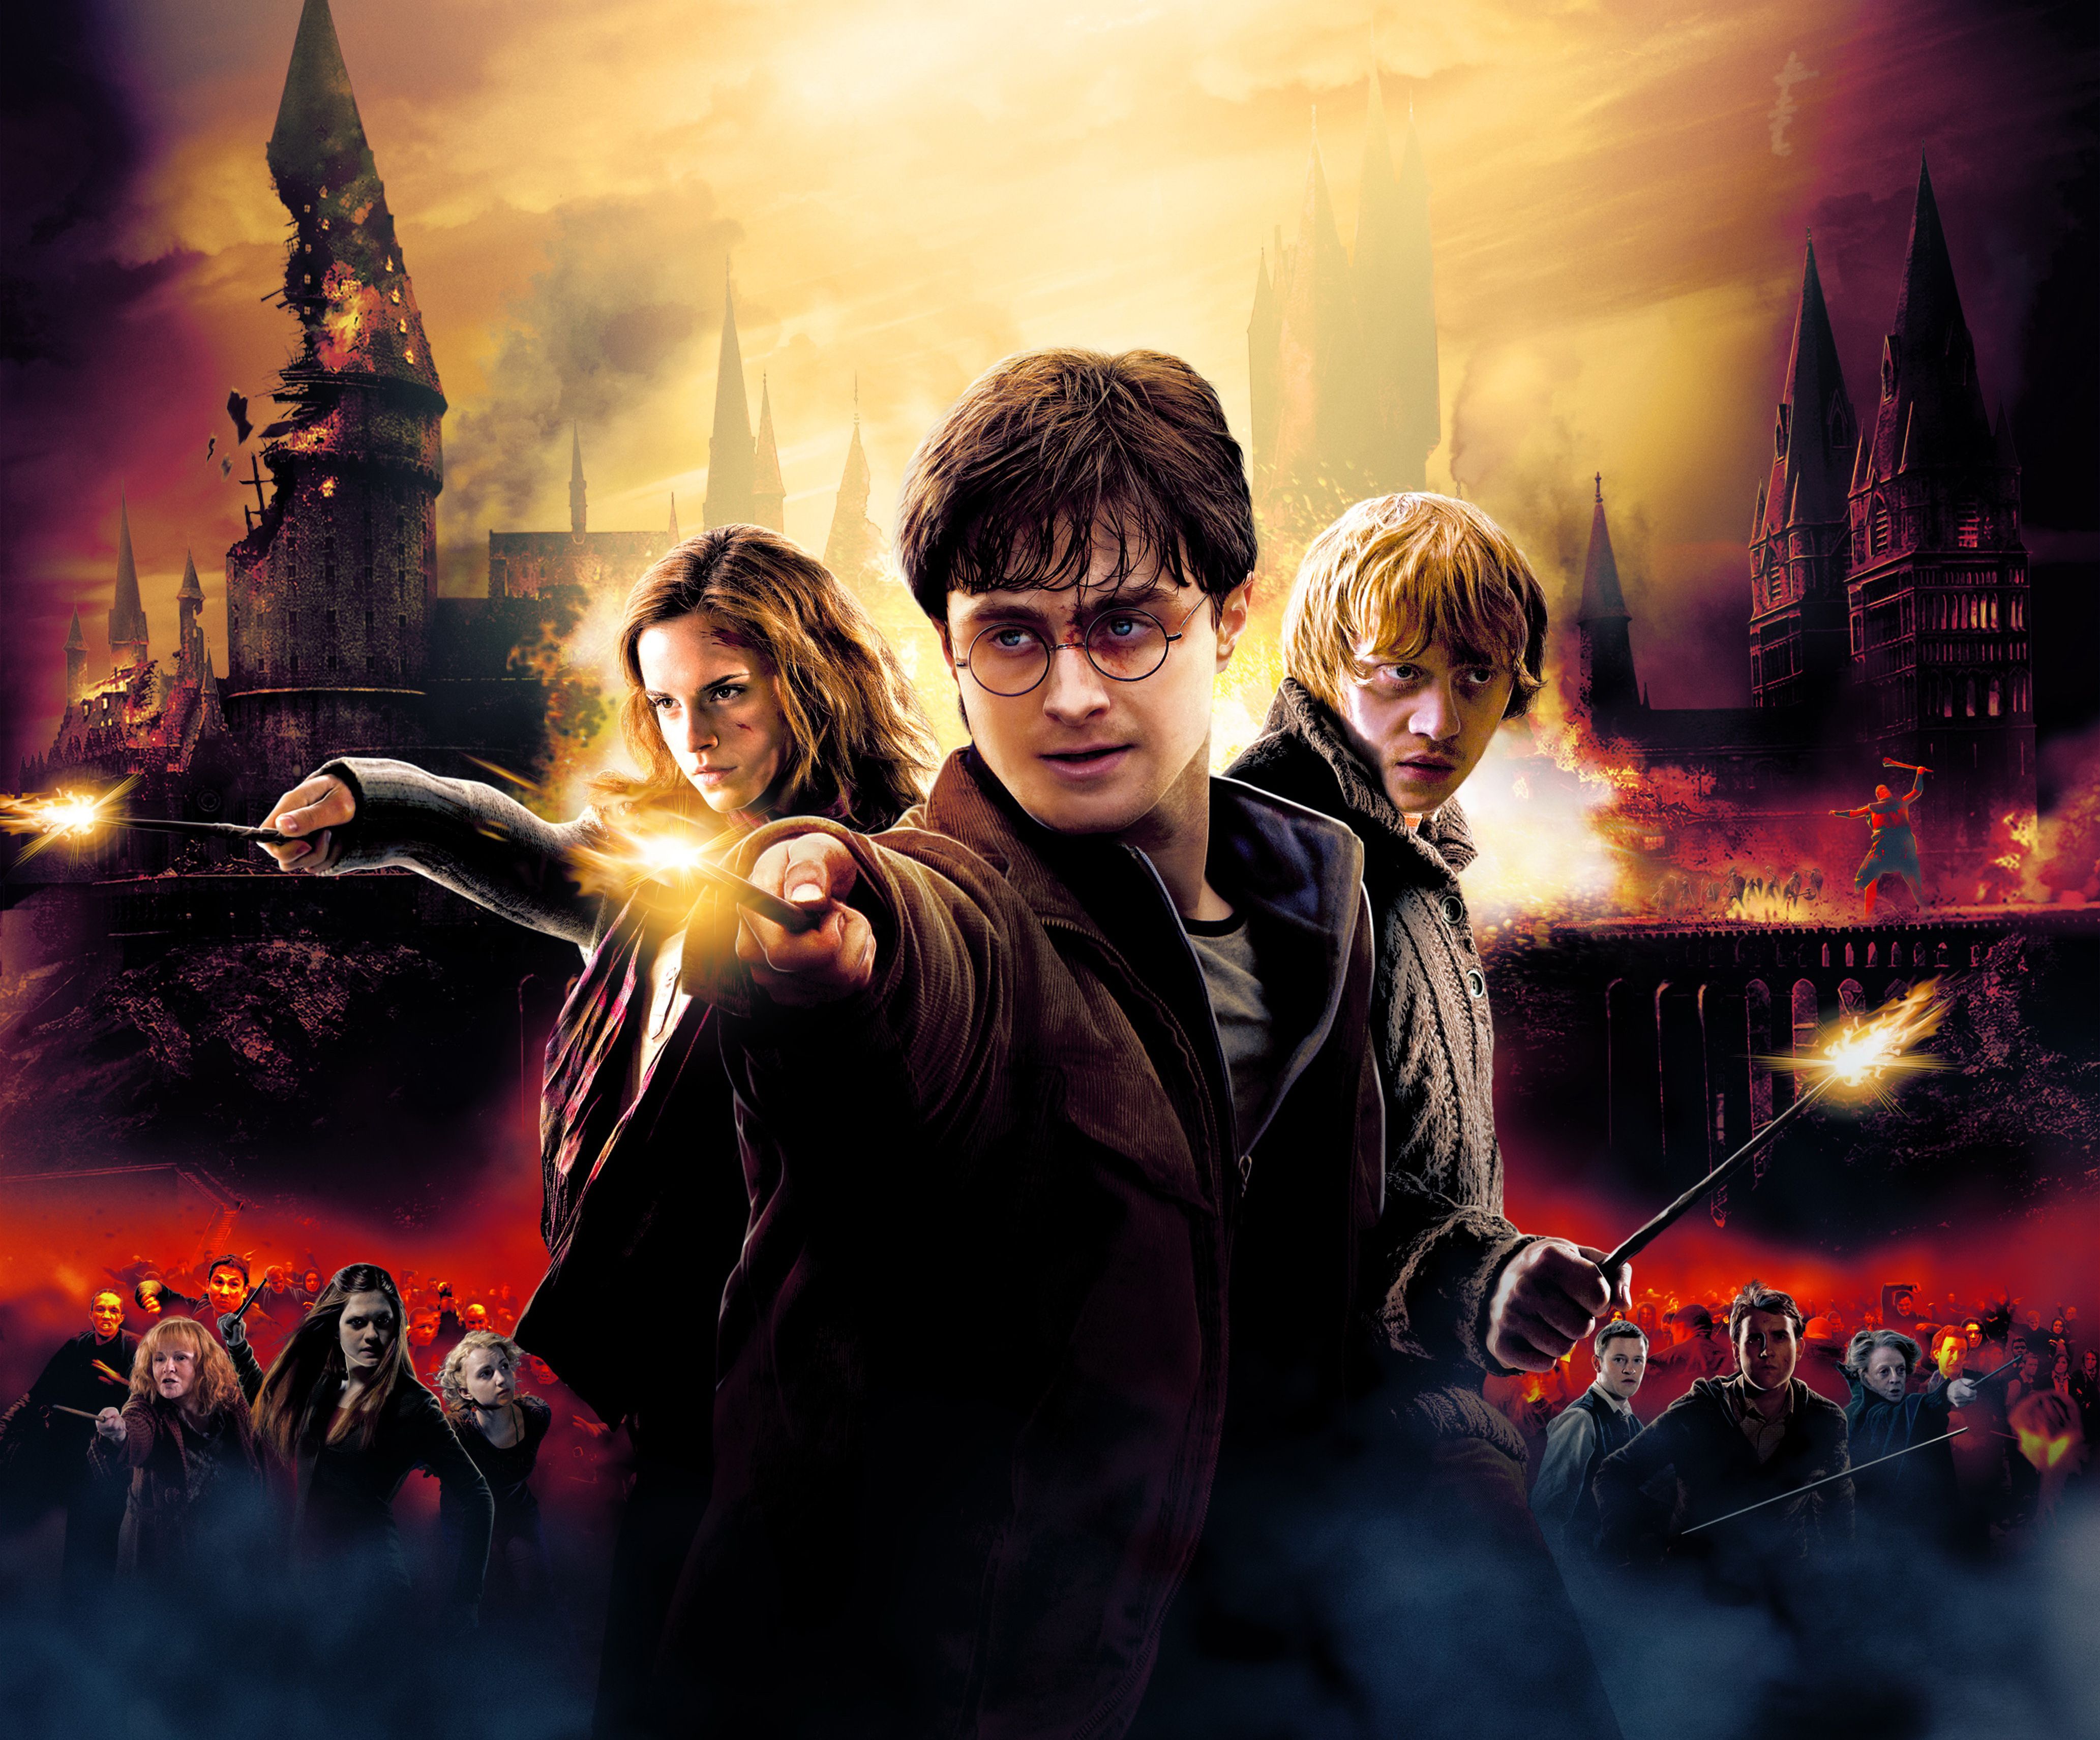 #Harry Potter and the Deathly Hallows, #Emma Watson, #Ron